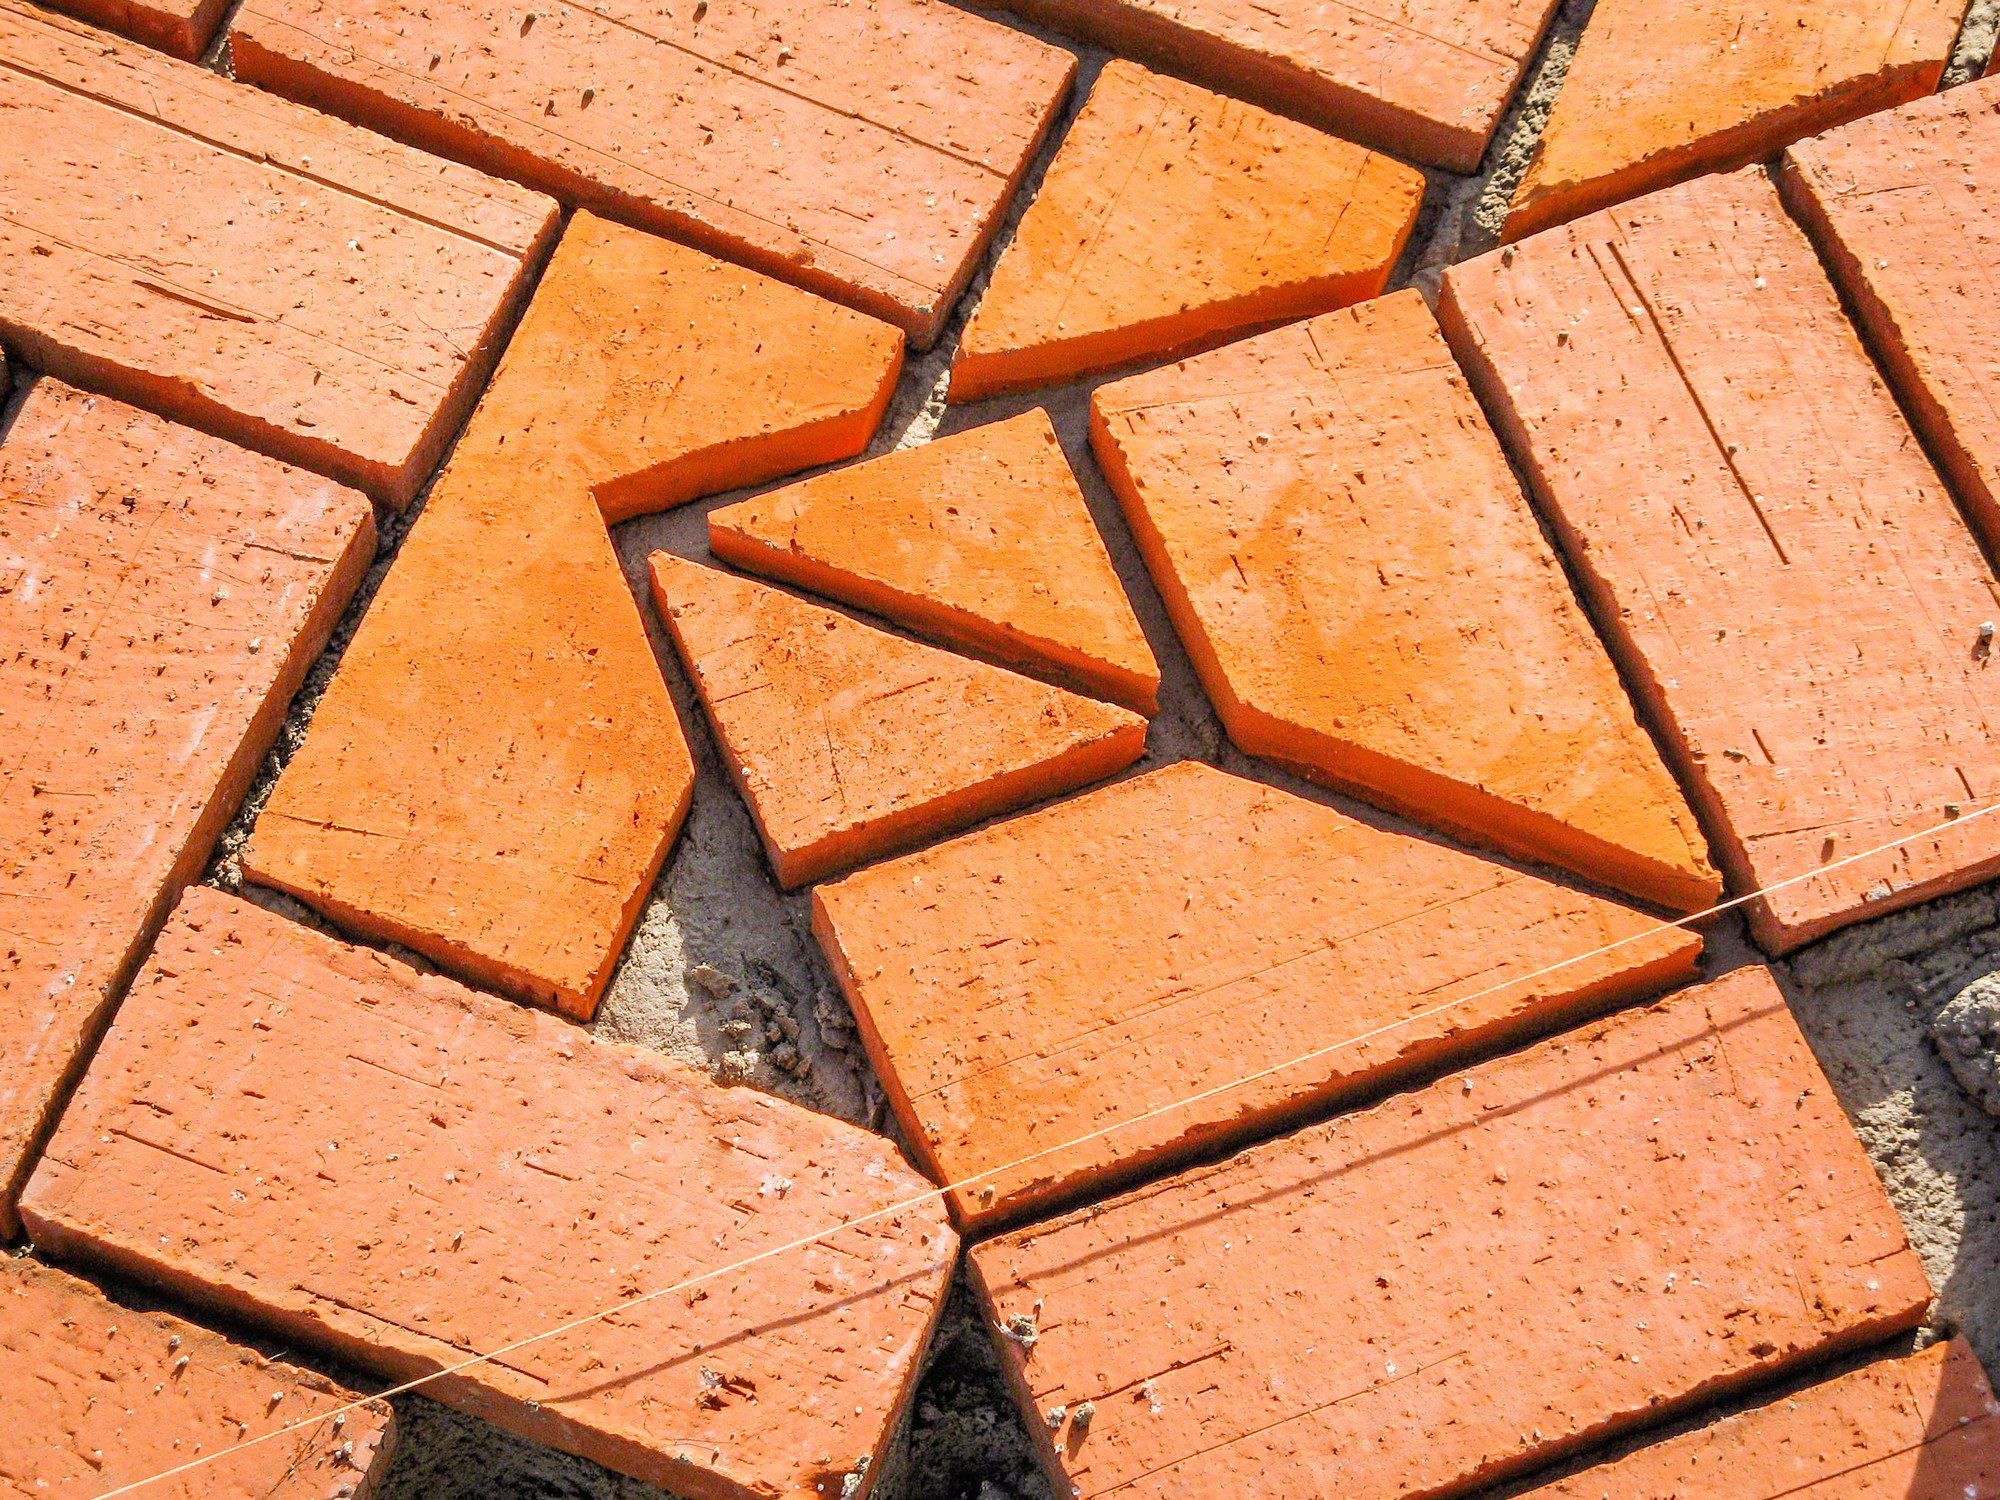 This image shows a collection of orange-red clay bricks laid out in a herringbone pattern. The bricks are not yet fully set, as evidenced by the presence of loose sand or concrete mix between the bricks, which suggests this is part of a construction or paving process. Some of the bricks have visible lines on them, which could be from the manufacturing process or might serve as cutting lines. The overall pattern is not completely uniform, indicating that the bricks may be in the process of being laid down or arranged, as part of a walkway, patio, or similar structure.